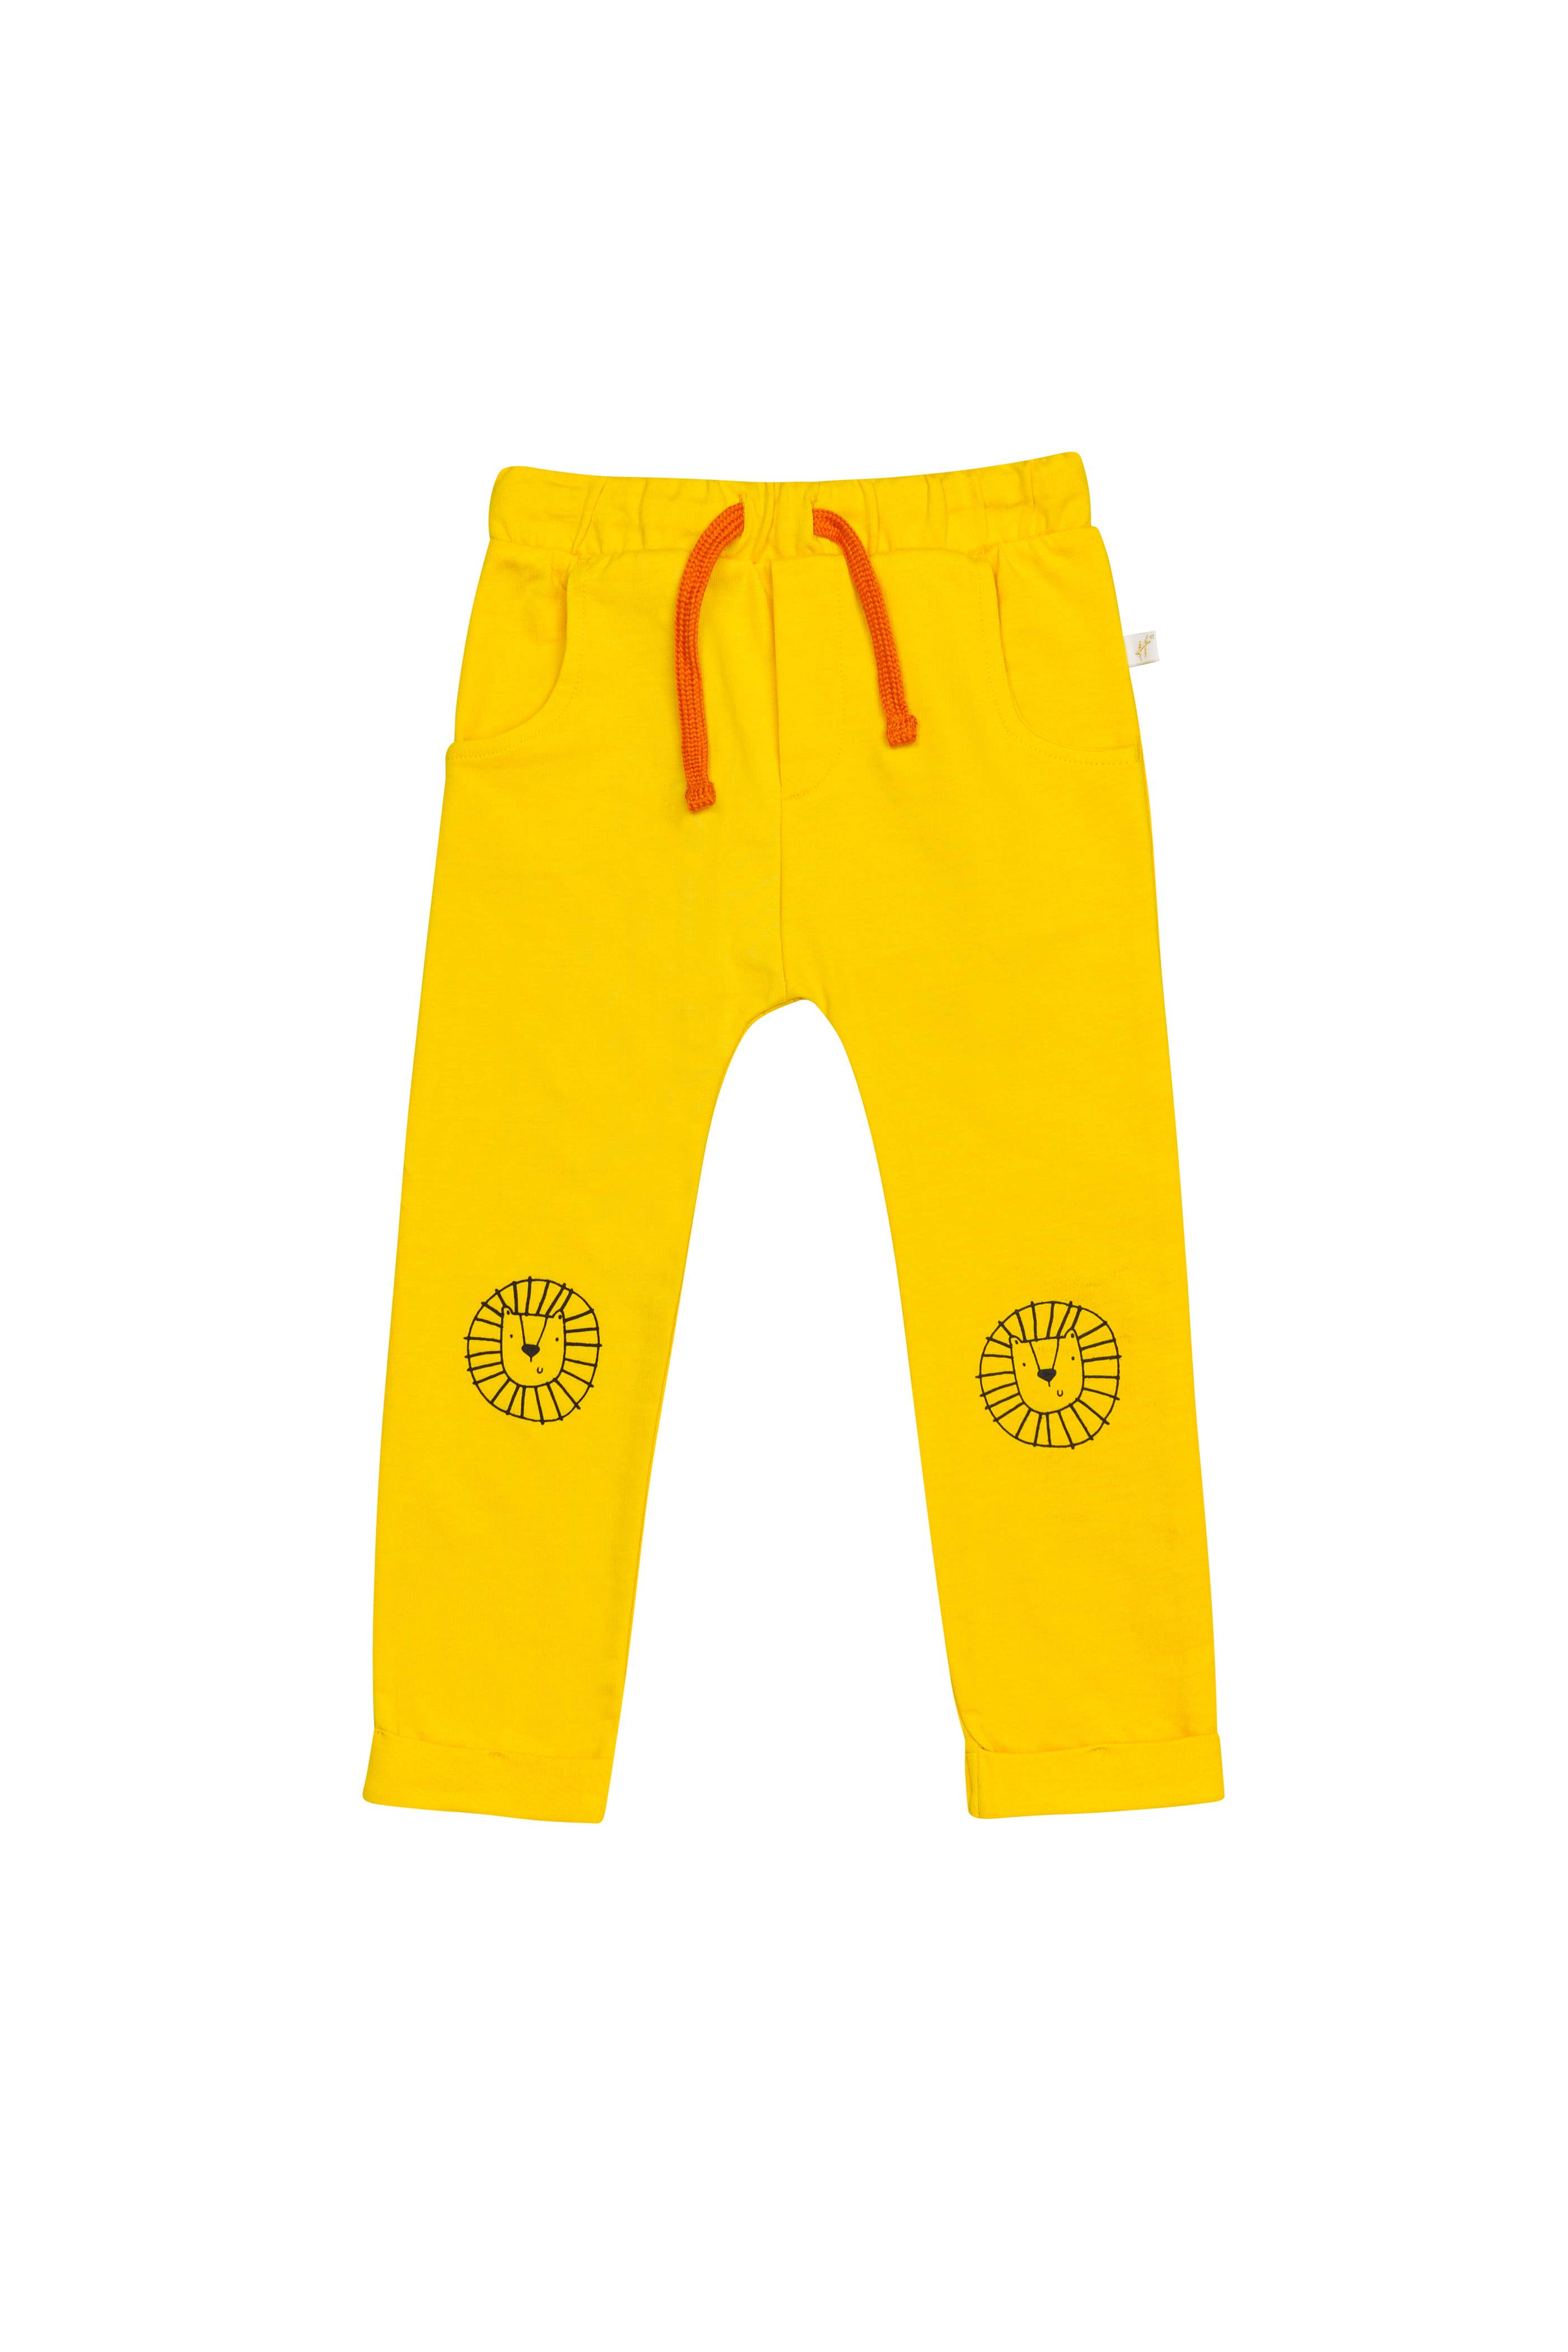 H by Hamleys Infant Boys Printed Yellow Joggers